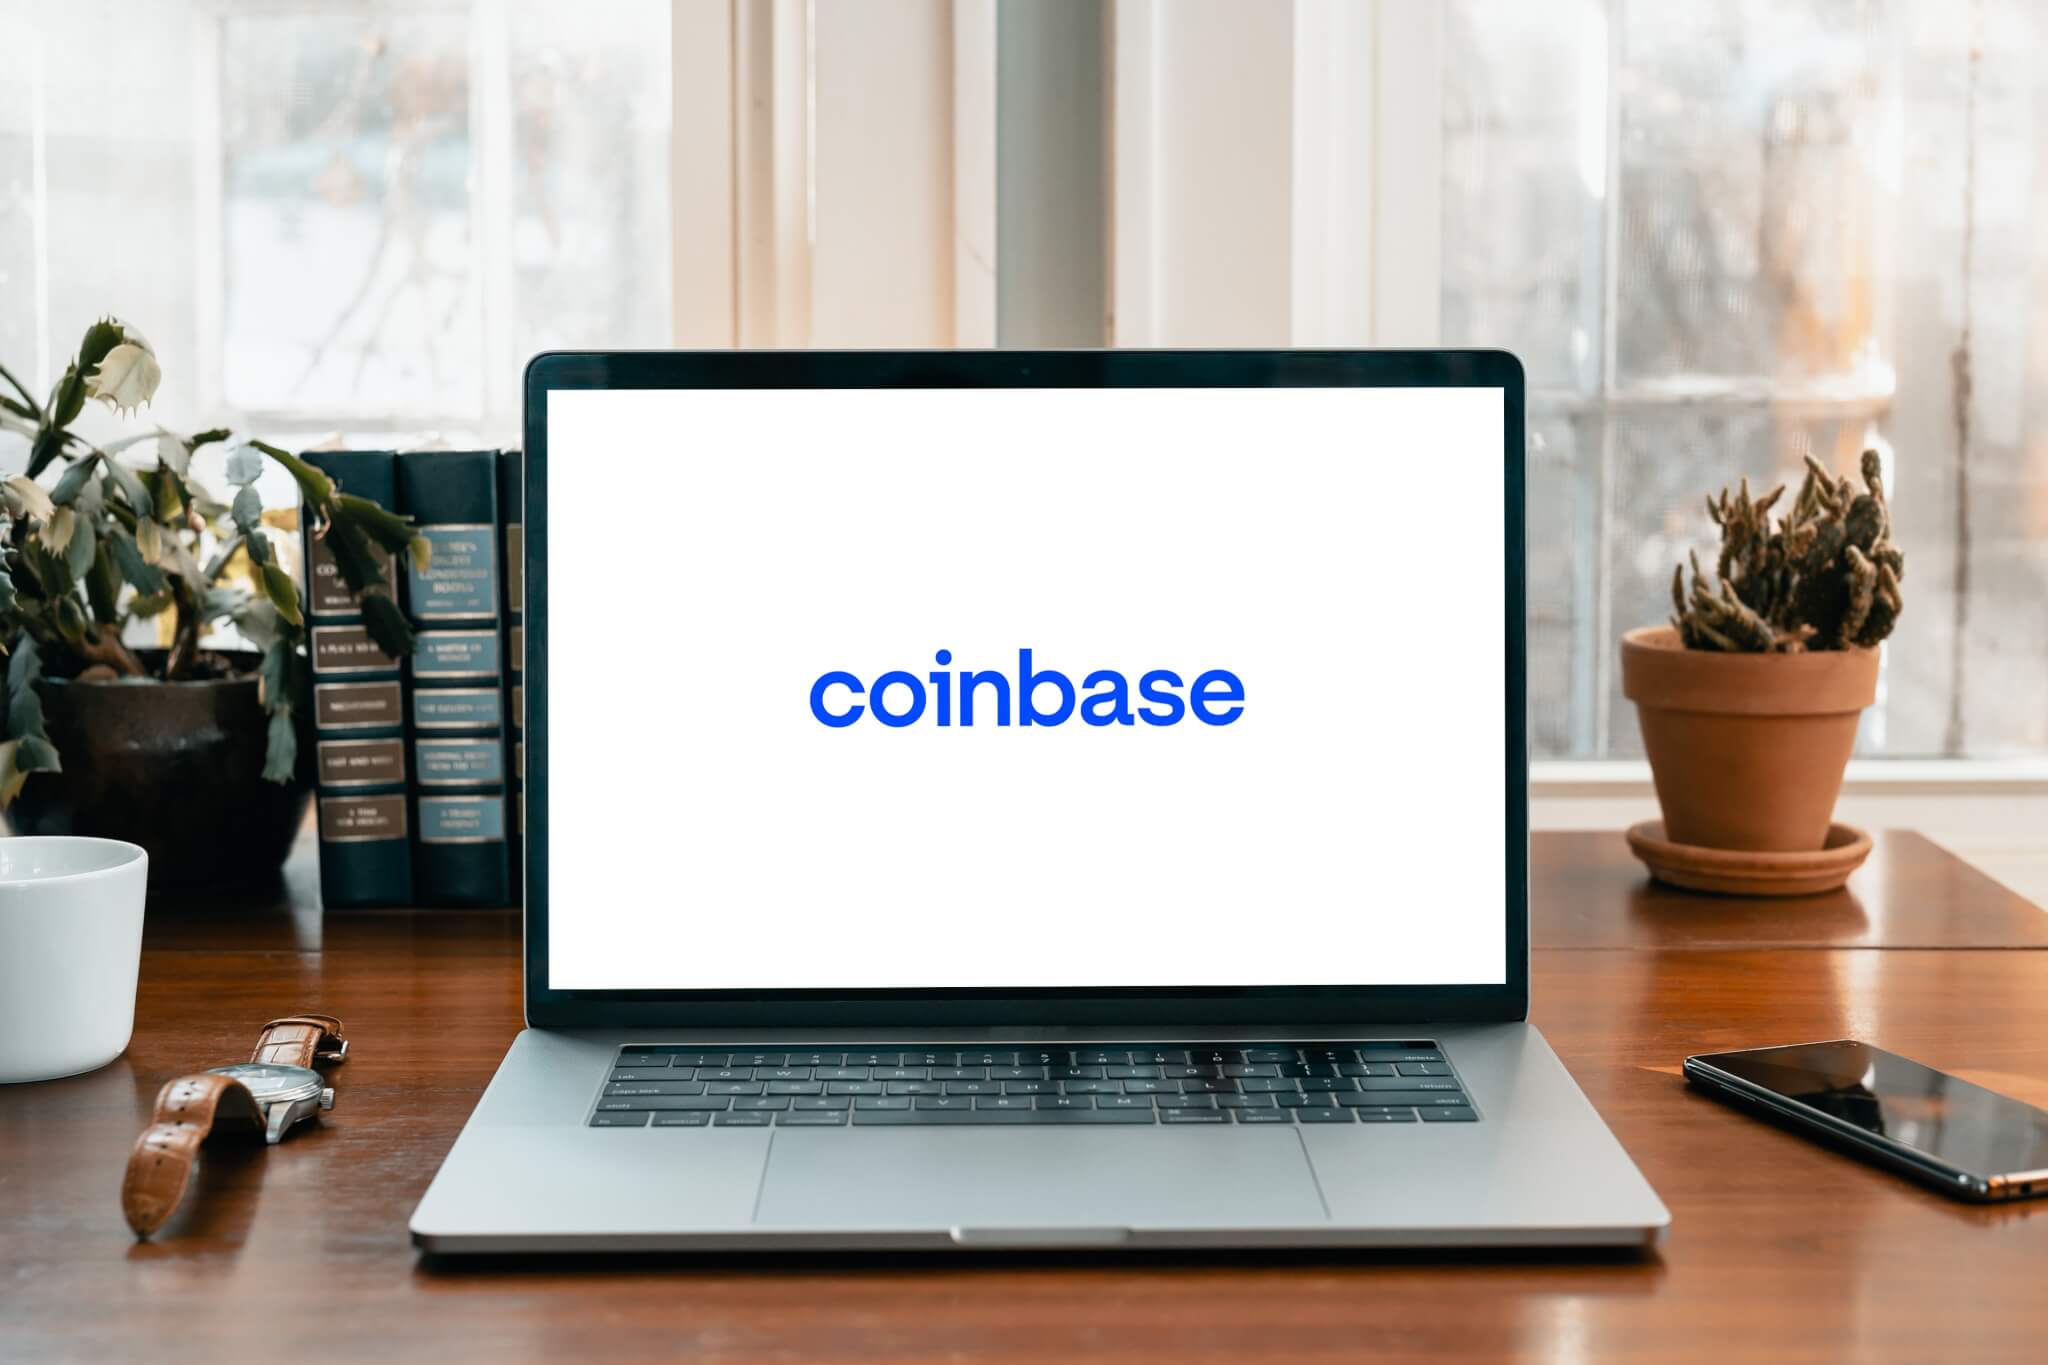 coinbase stock price forecast barclays analyst